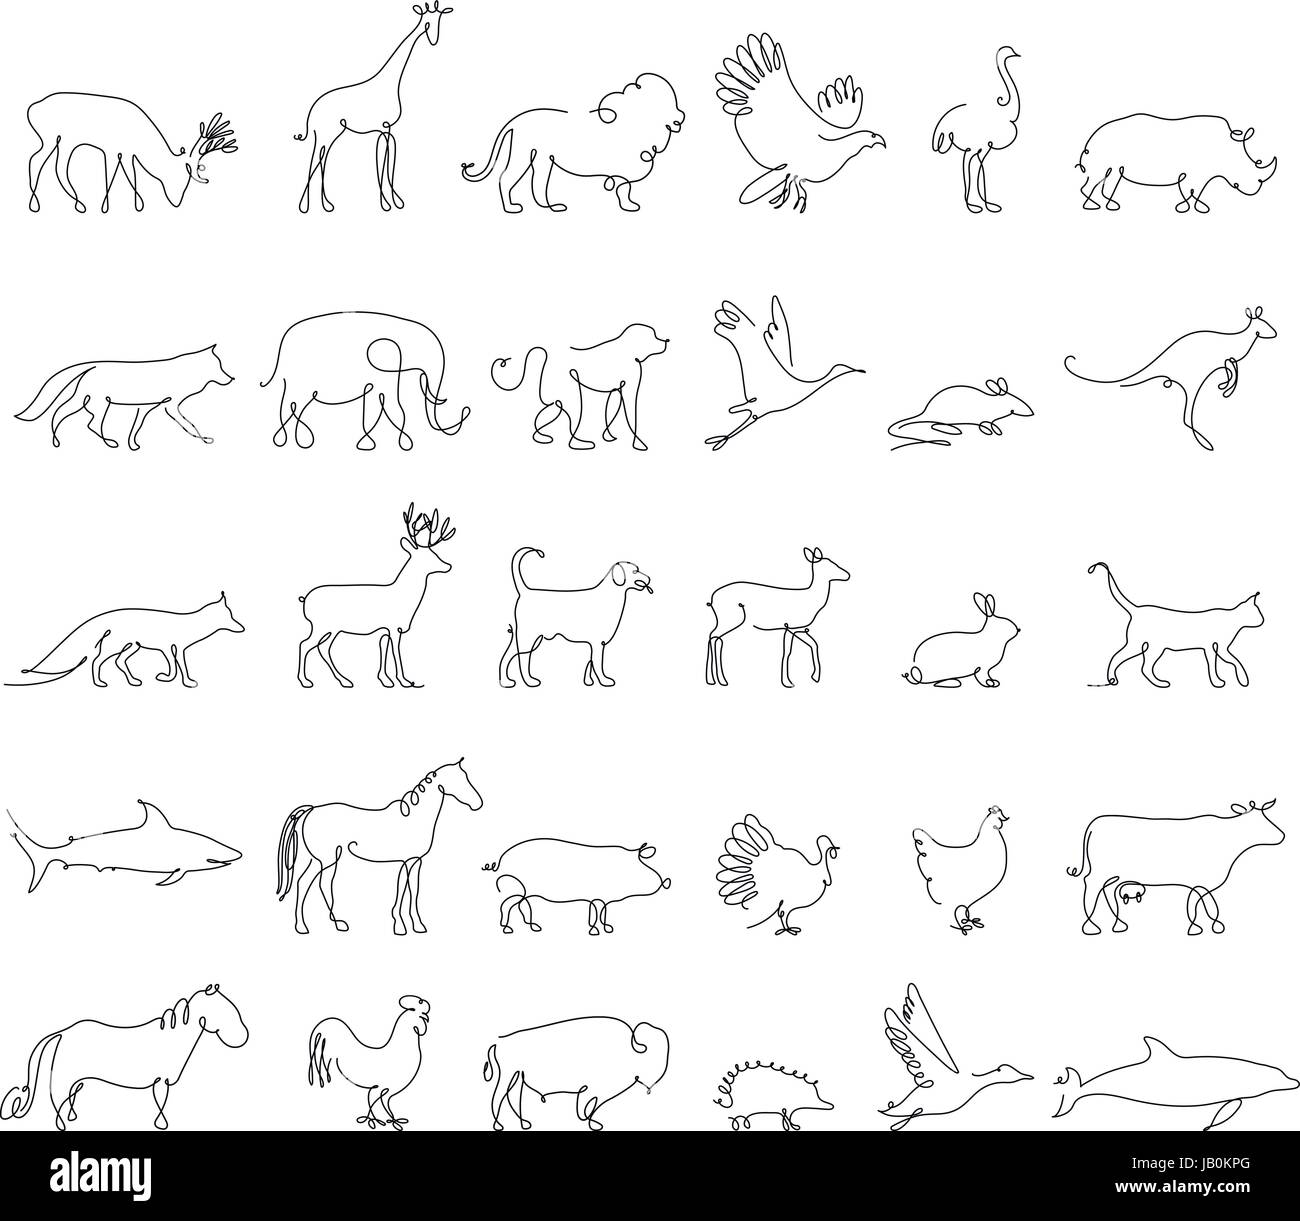 One line animals set, logos. vector stock illustration. Turkey and cow, pig and eagle, giraffe and horse, dog and cat, fox and wolf, dolphin and shark, deer and elephant, stork and chicken. Stock Vector